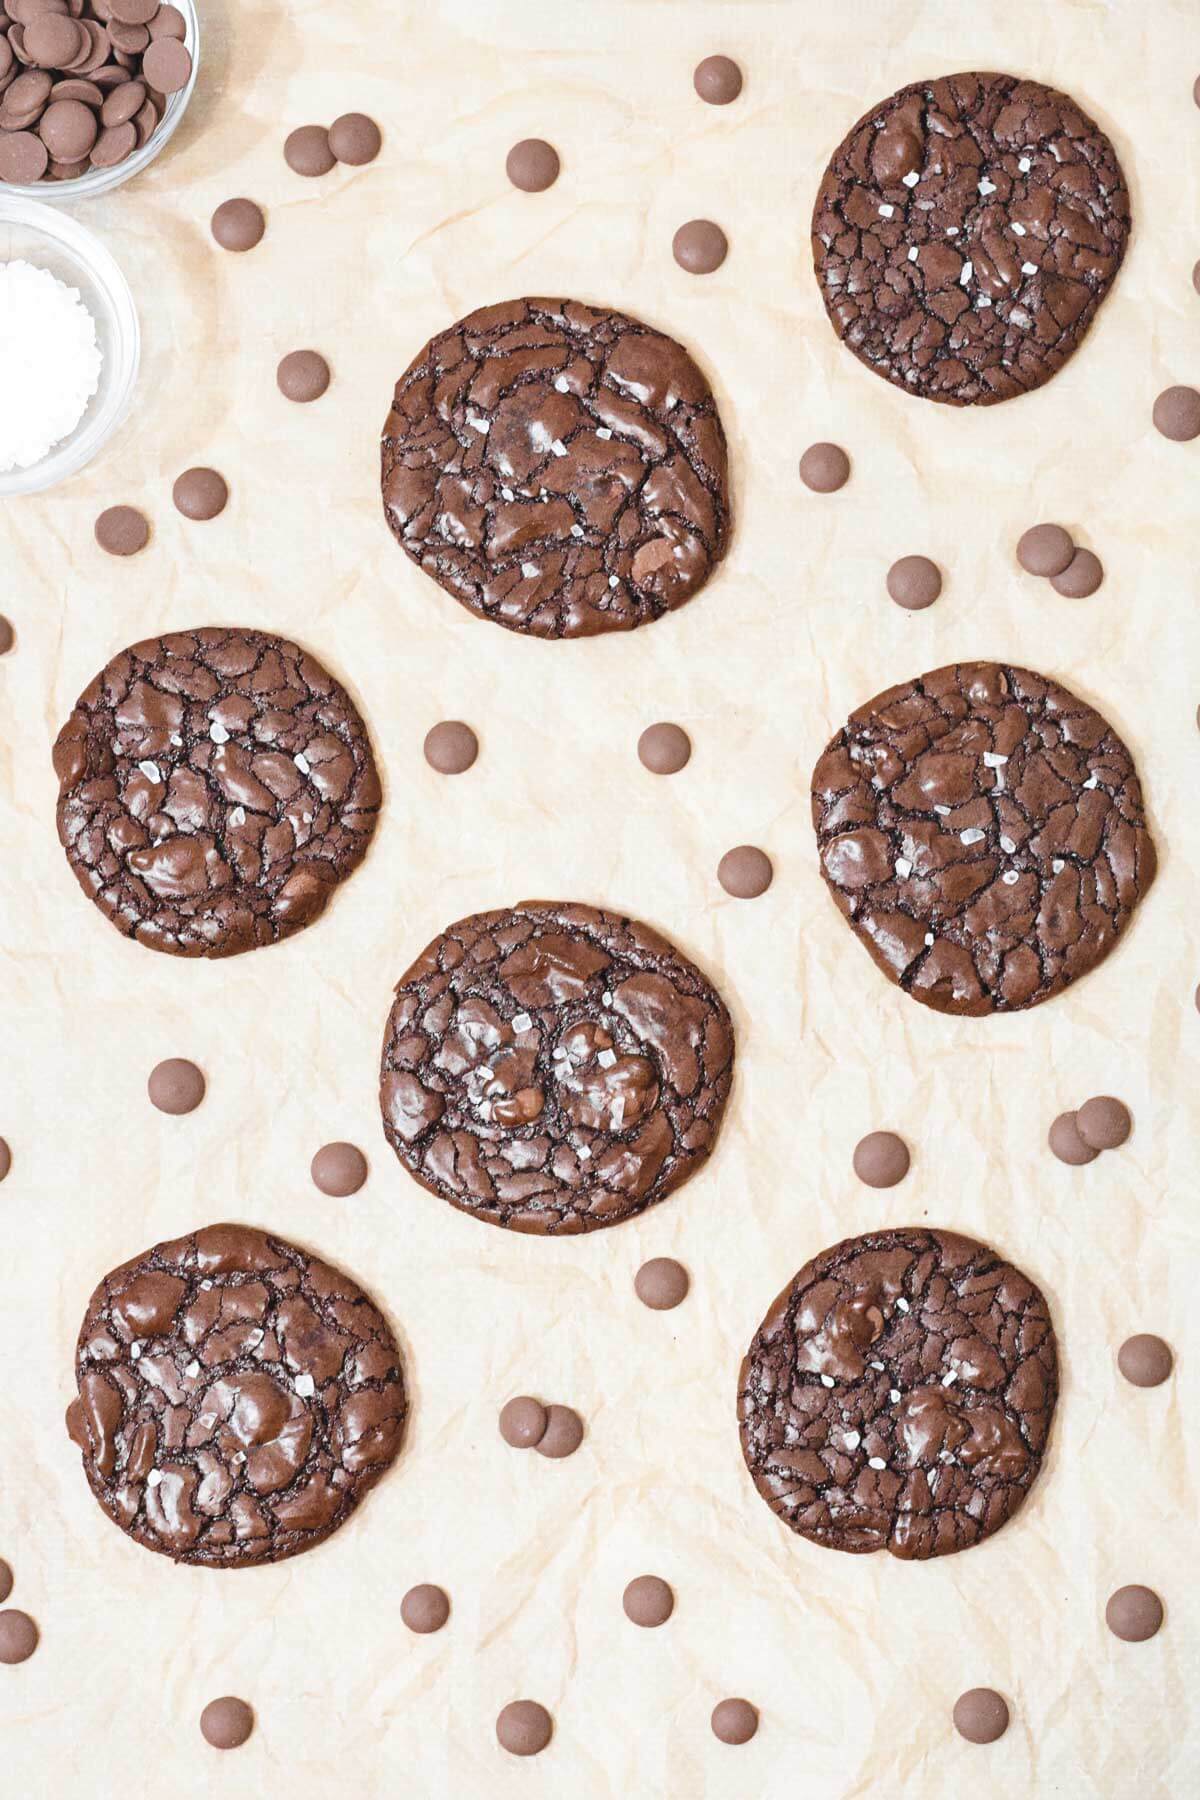 gluten free chocolate brownie cookies with chocolate chips and sprinkled with sea salt with bowls of salt and chocolate behind.